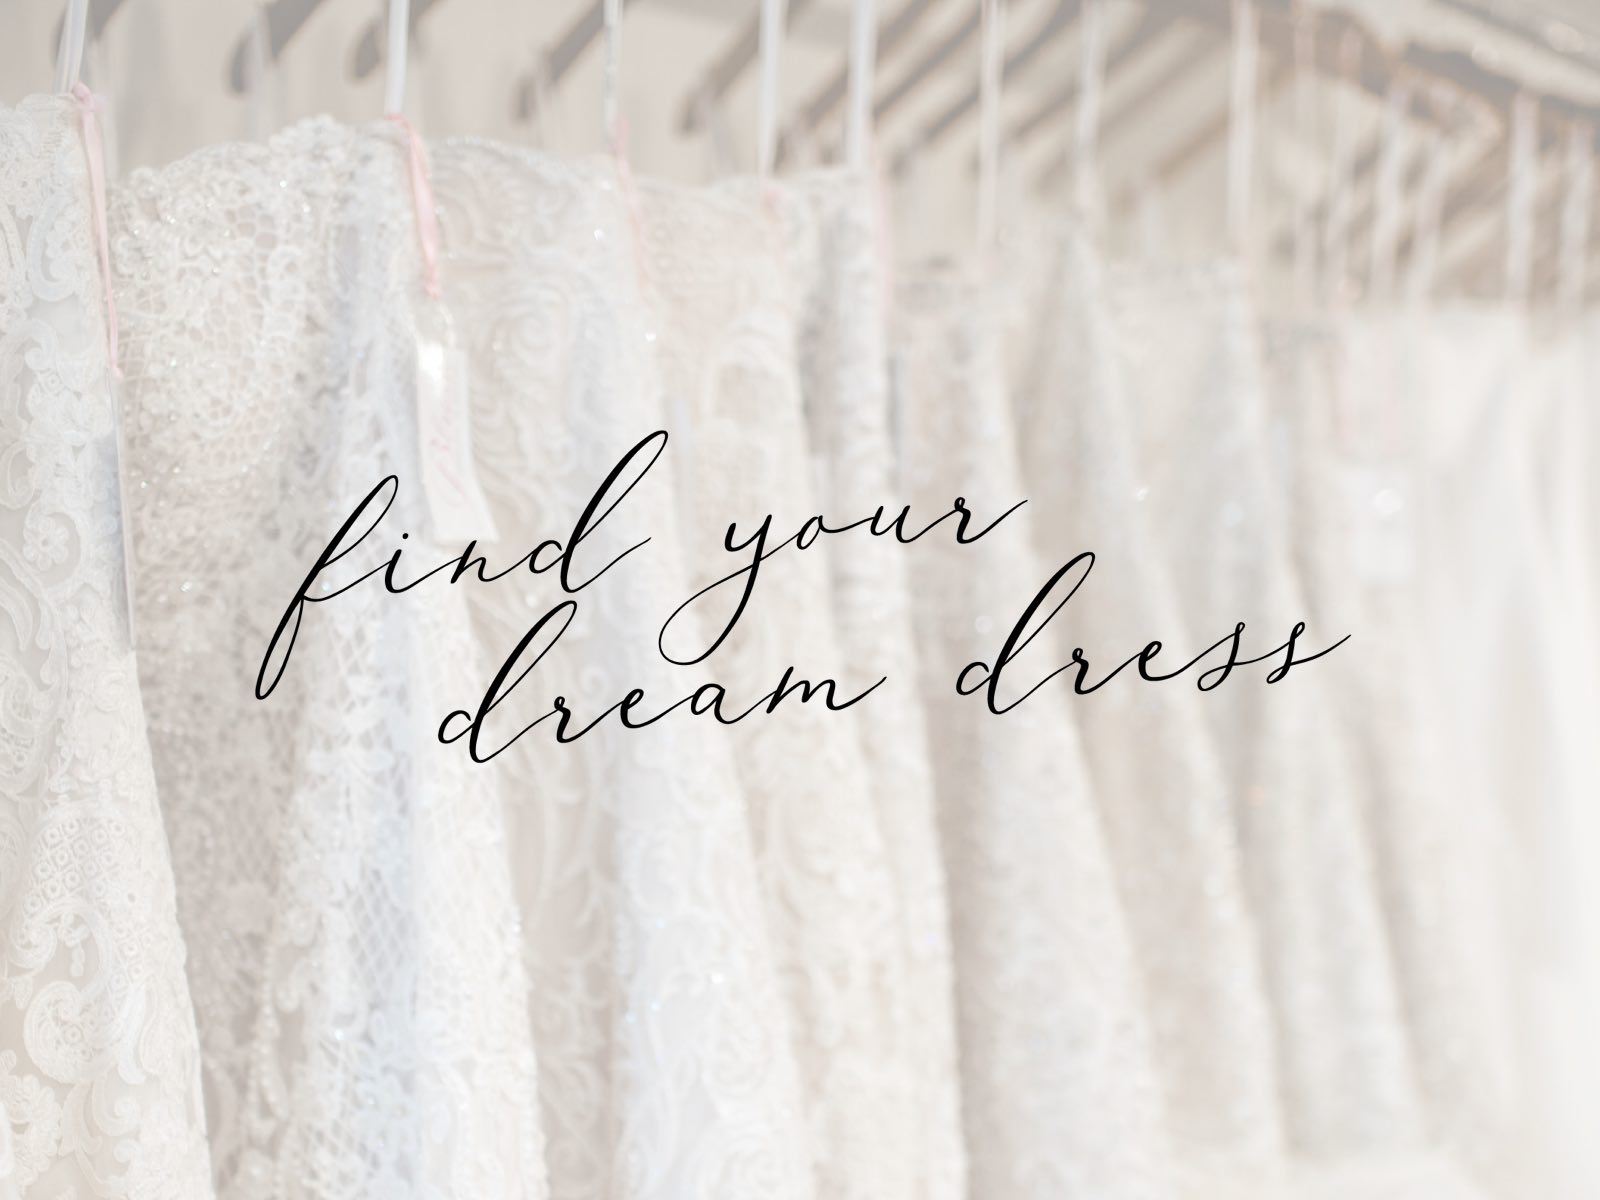 find your dream dress. Mobile image